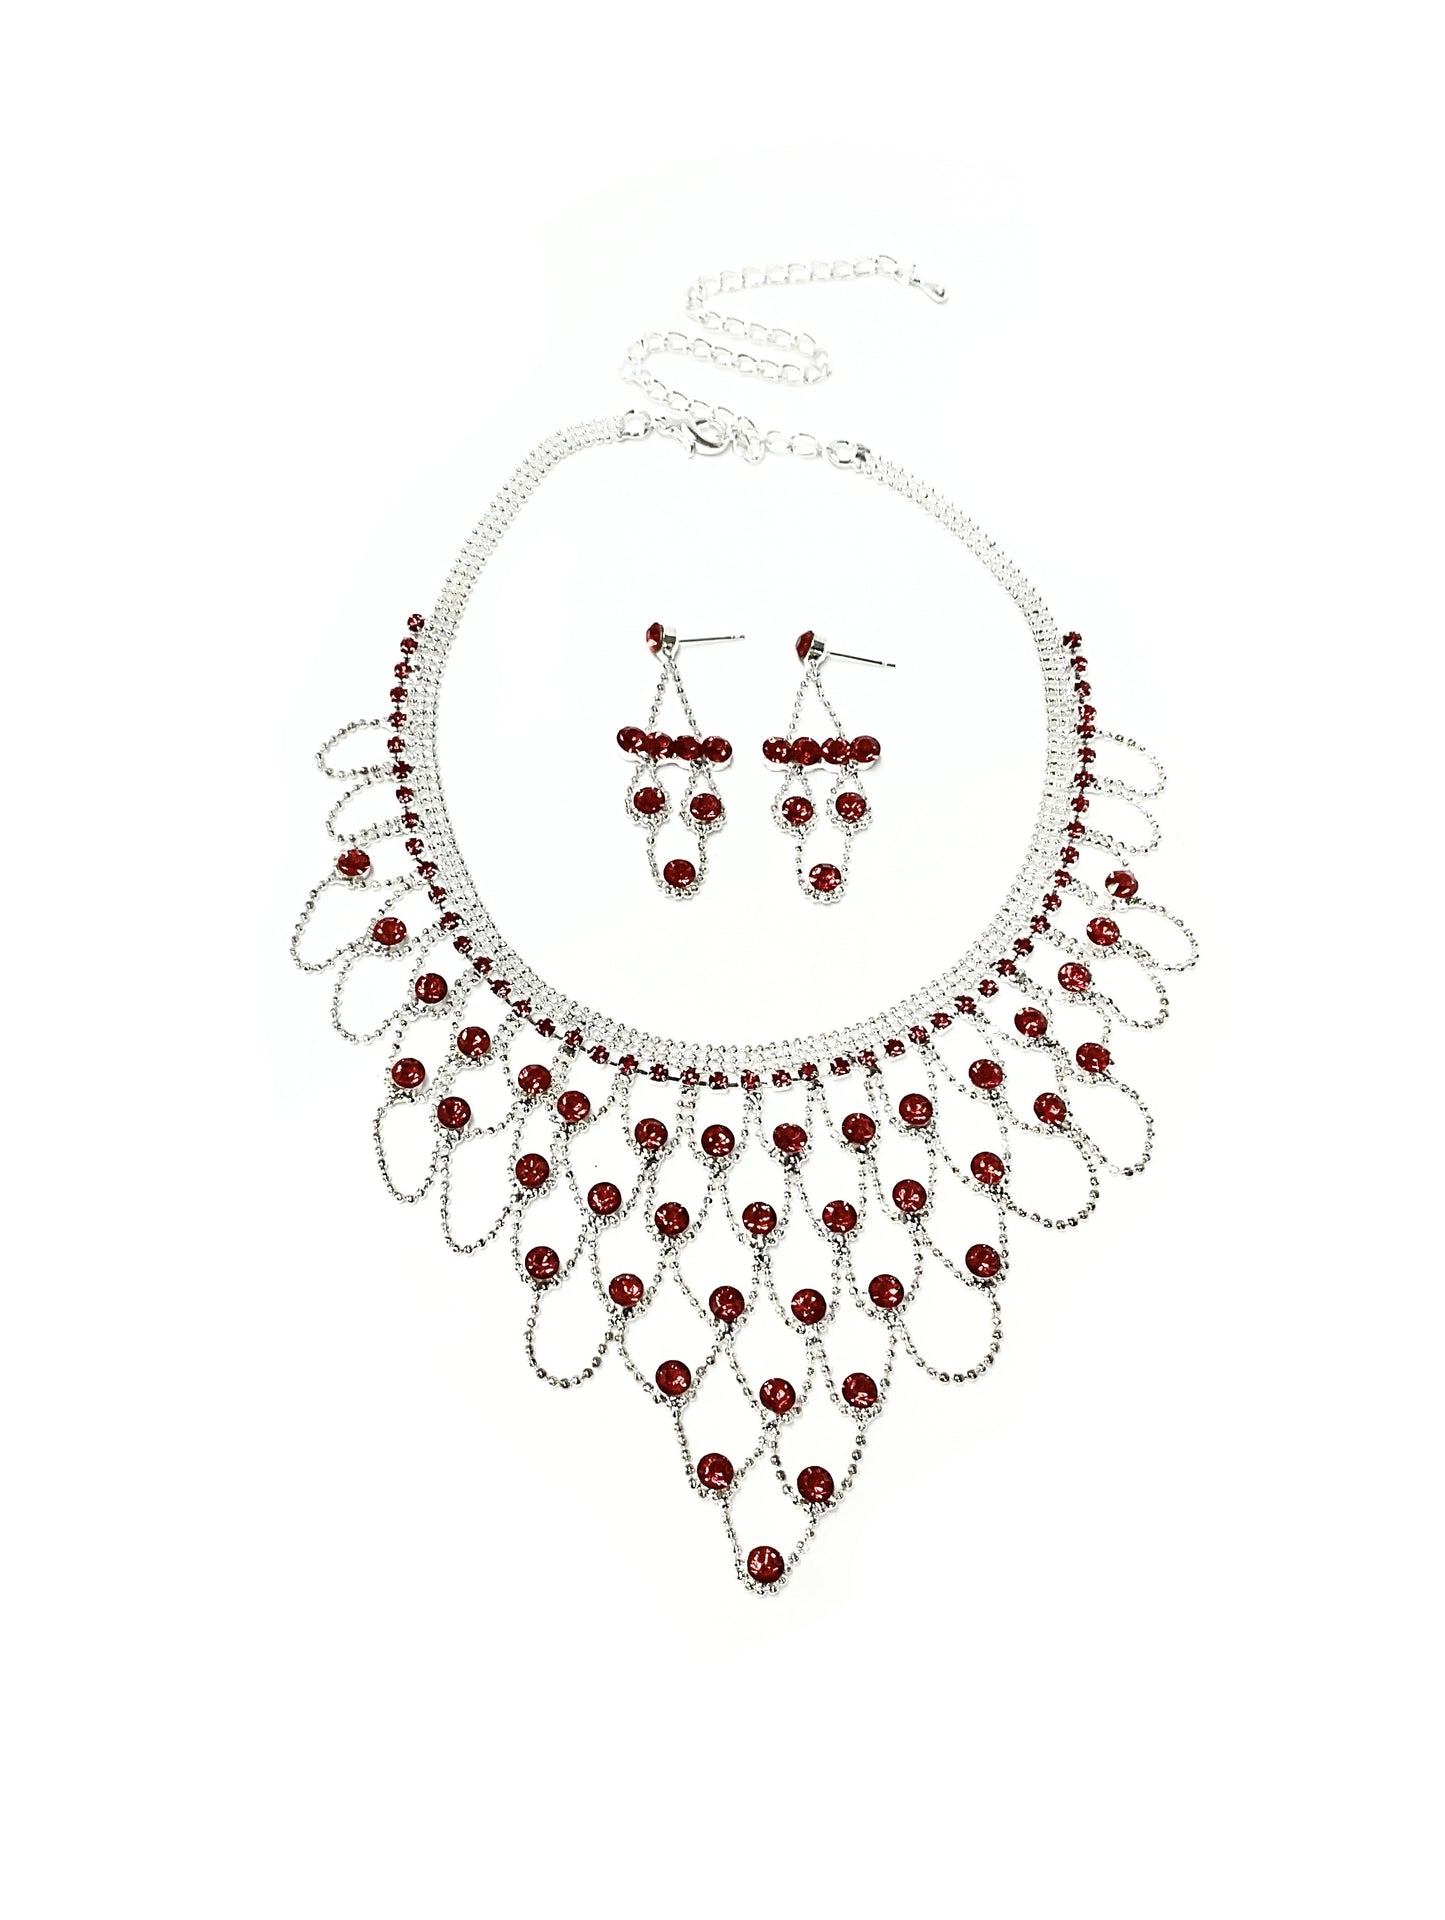 Net style Necklace and Earrings Set #66-14110RD